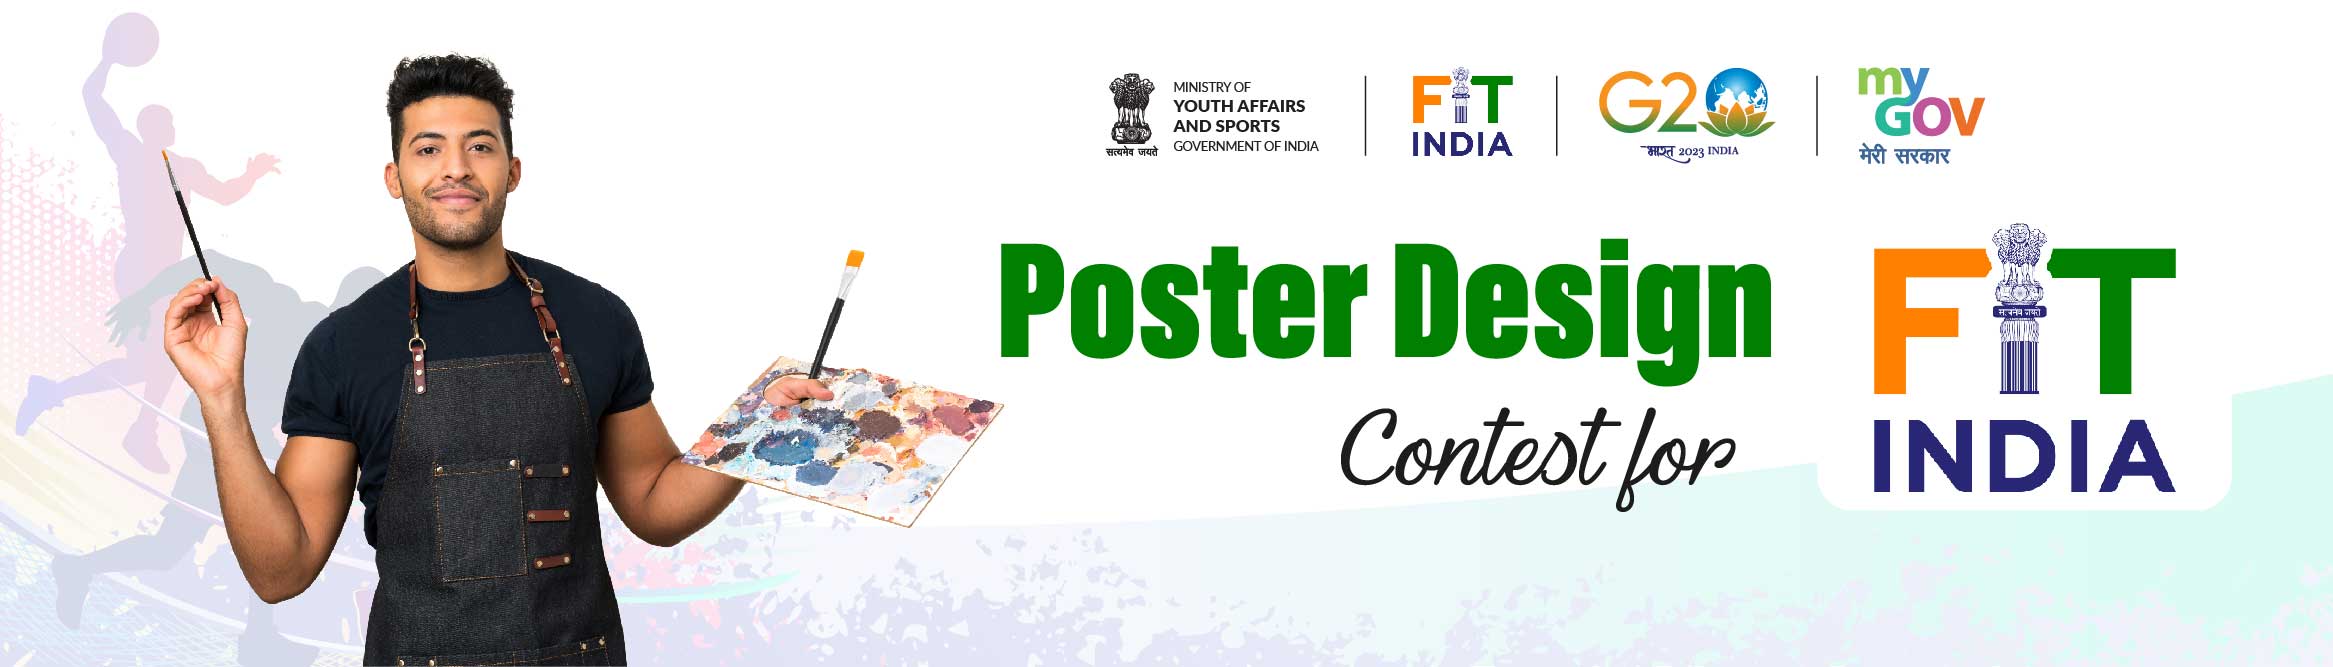 Poster Design Contest for Fit India